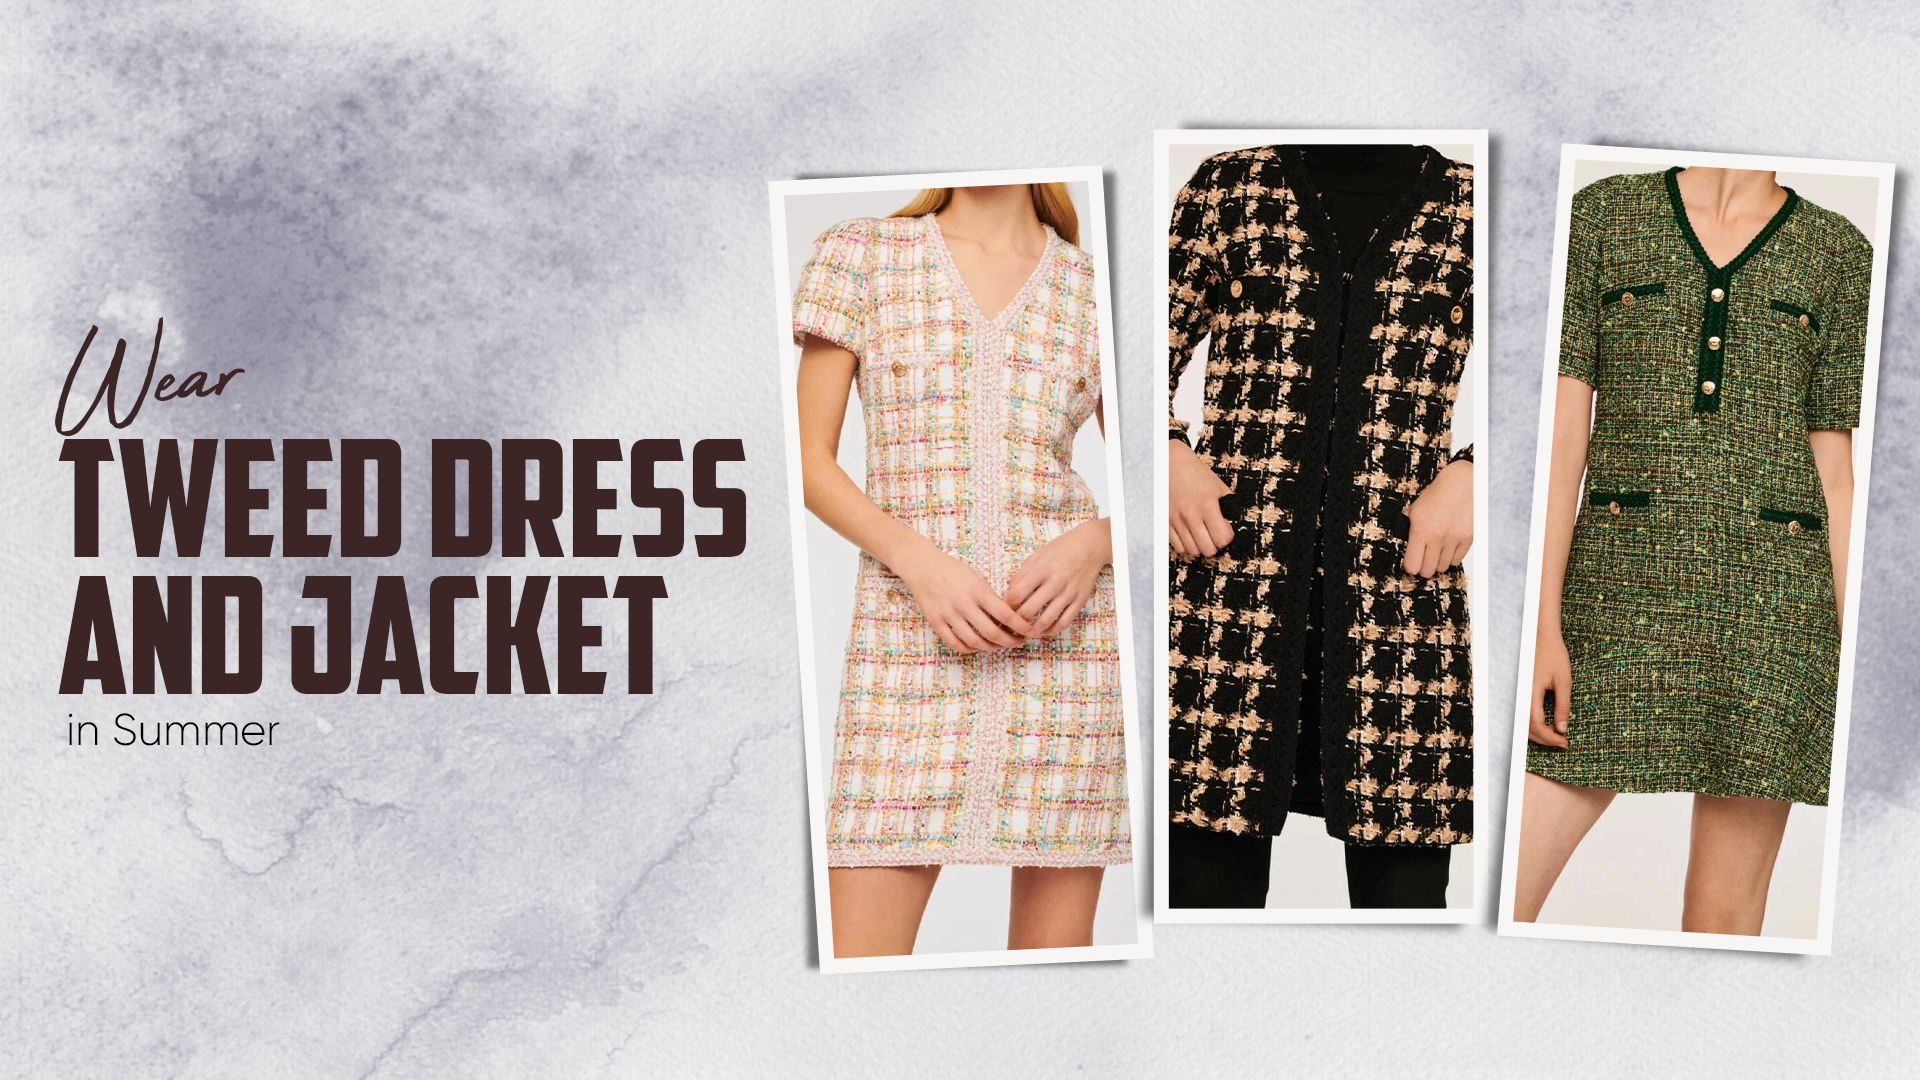 How You Can Wear Tweed Dress and Jacket in Summer